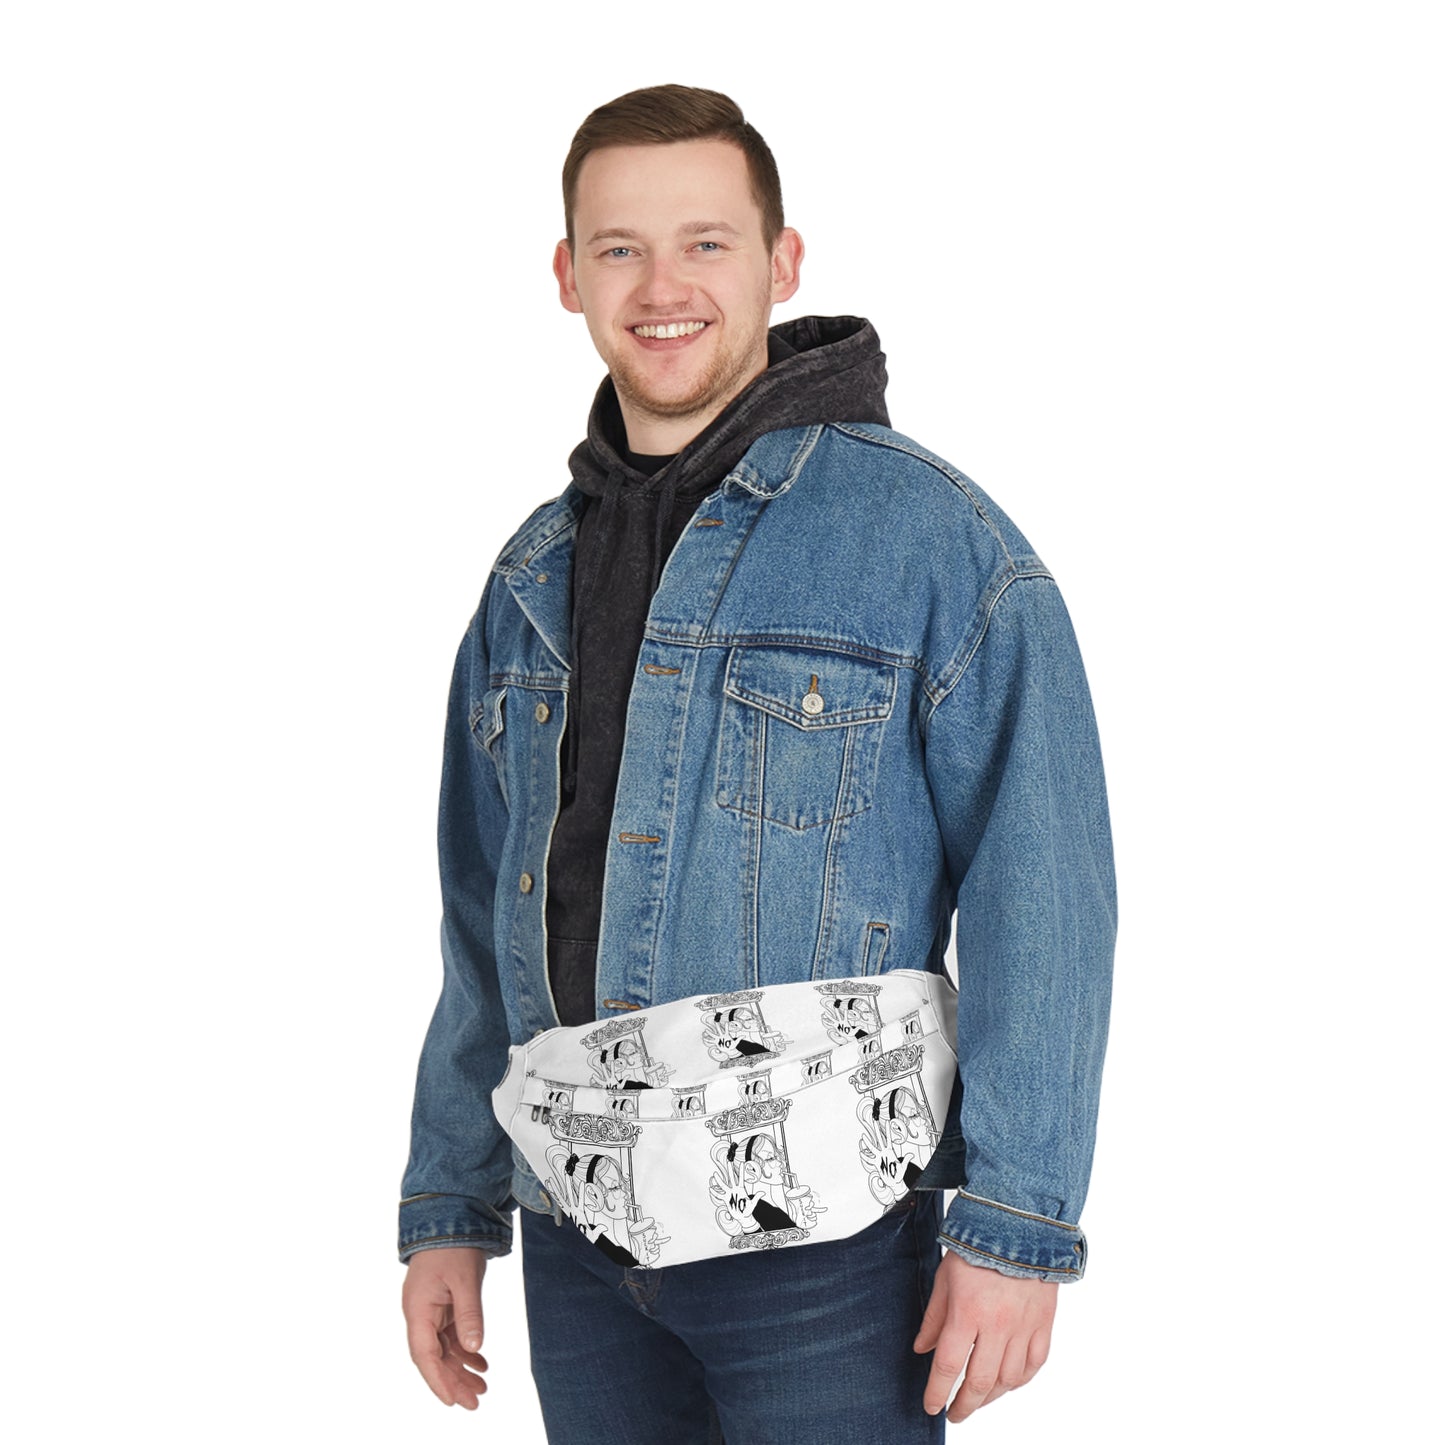 Copy of Large Fanny Pack